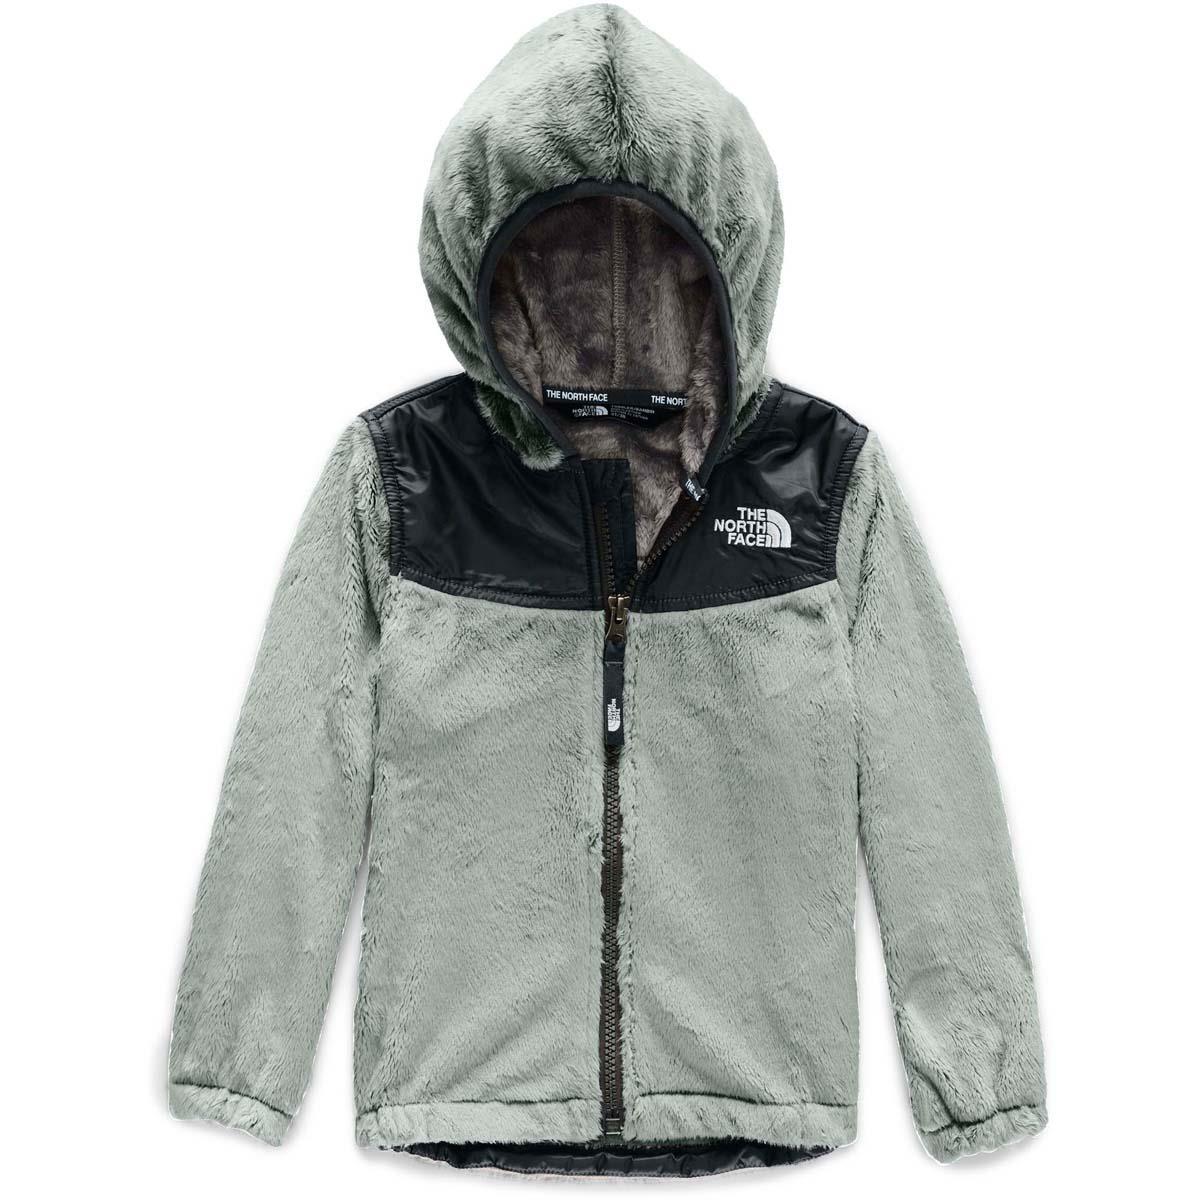 north face toddler jacket 5t